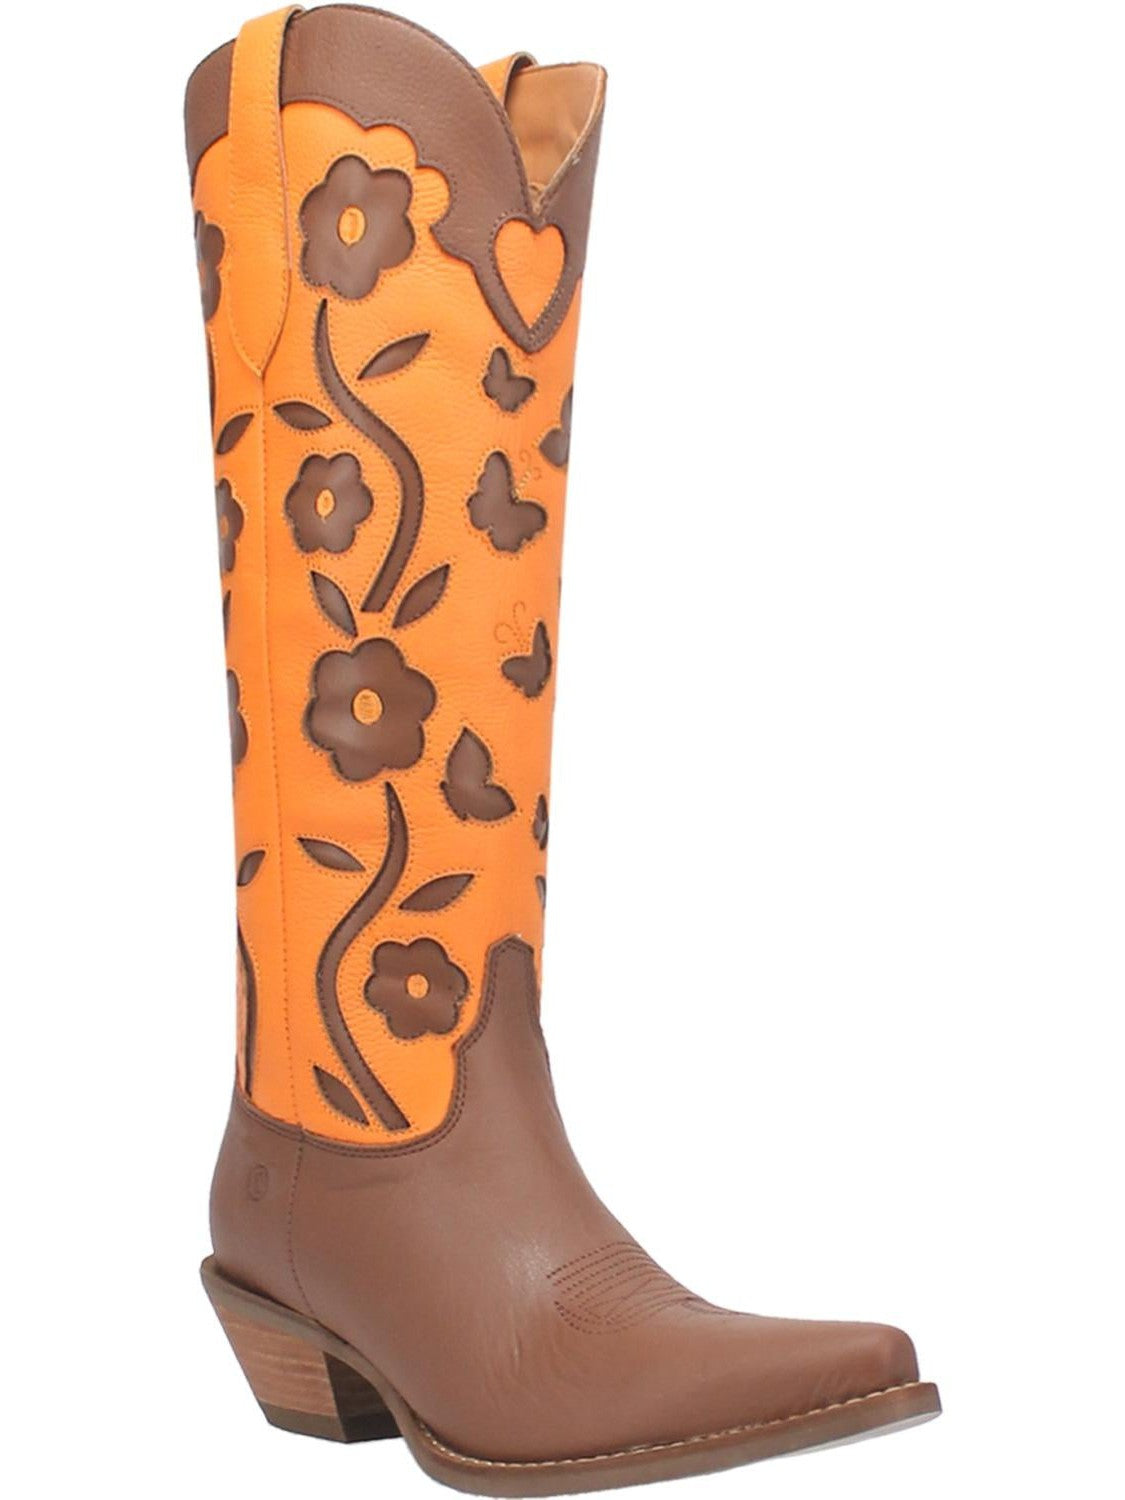 Orange and brown floral western boots